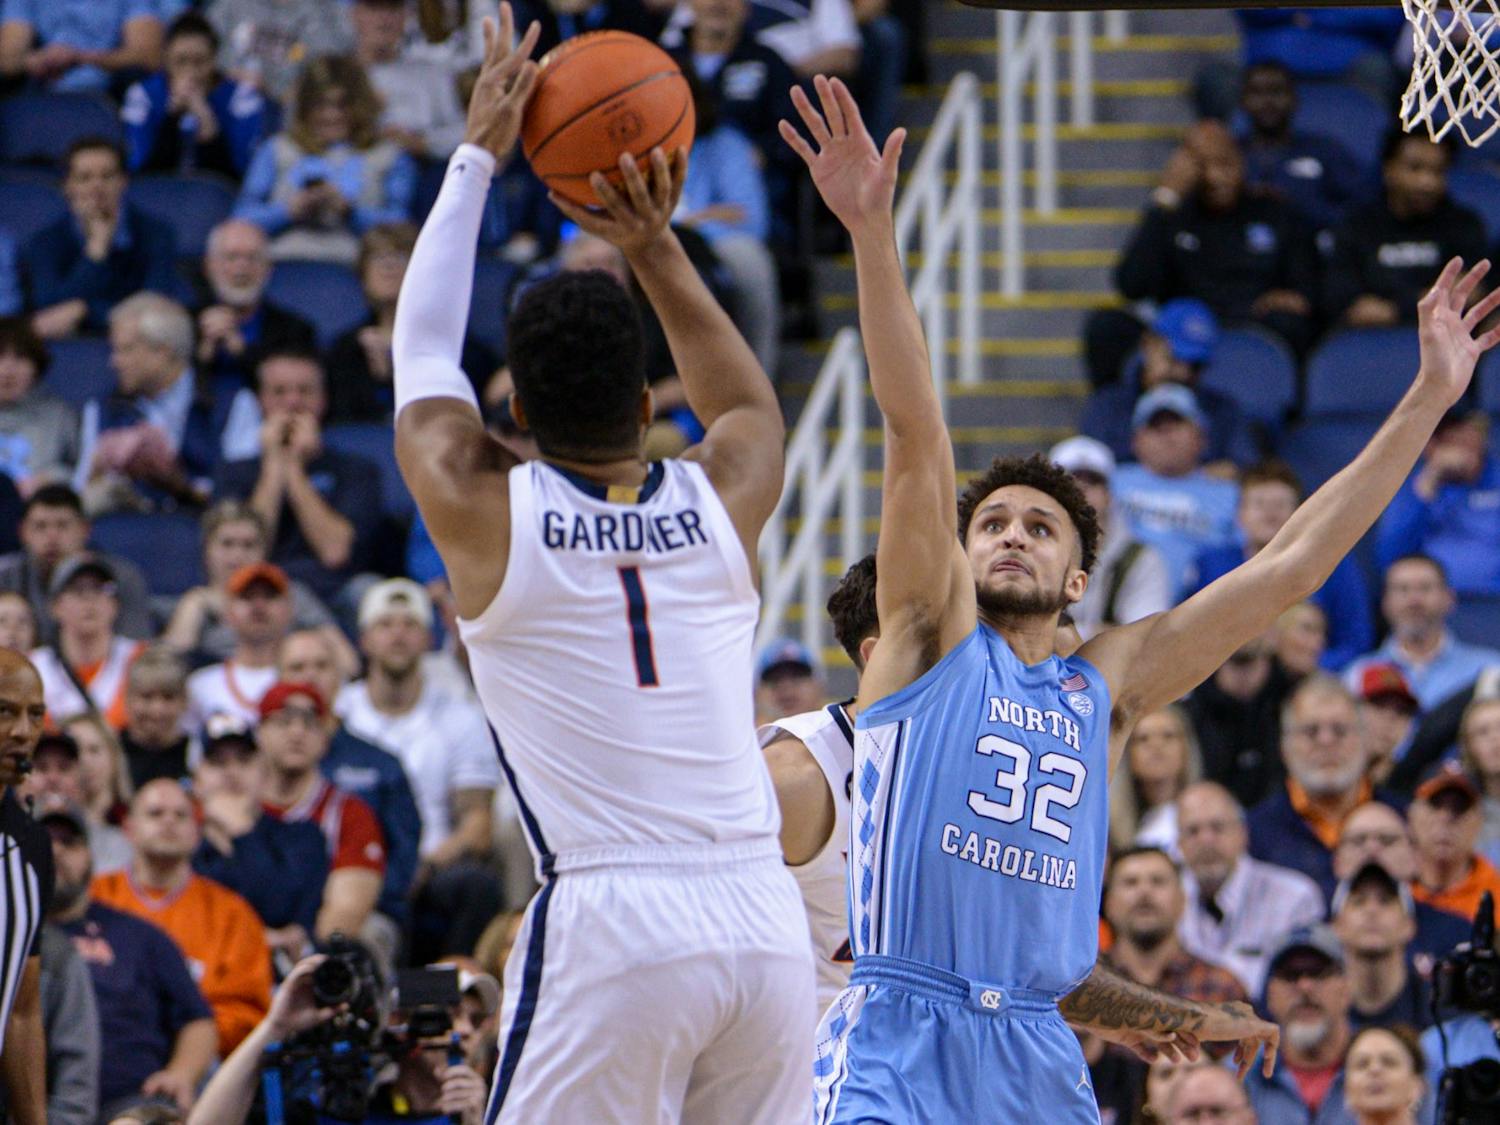 UNC graduate forward Pete Nance (32) defends a 3-pointer during the game against Virginia in the ACC Tournament Quarterfinals at Greensboro Coliseum on March 9, 2023. UNC fell to Virginia 68-59.